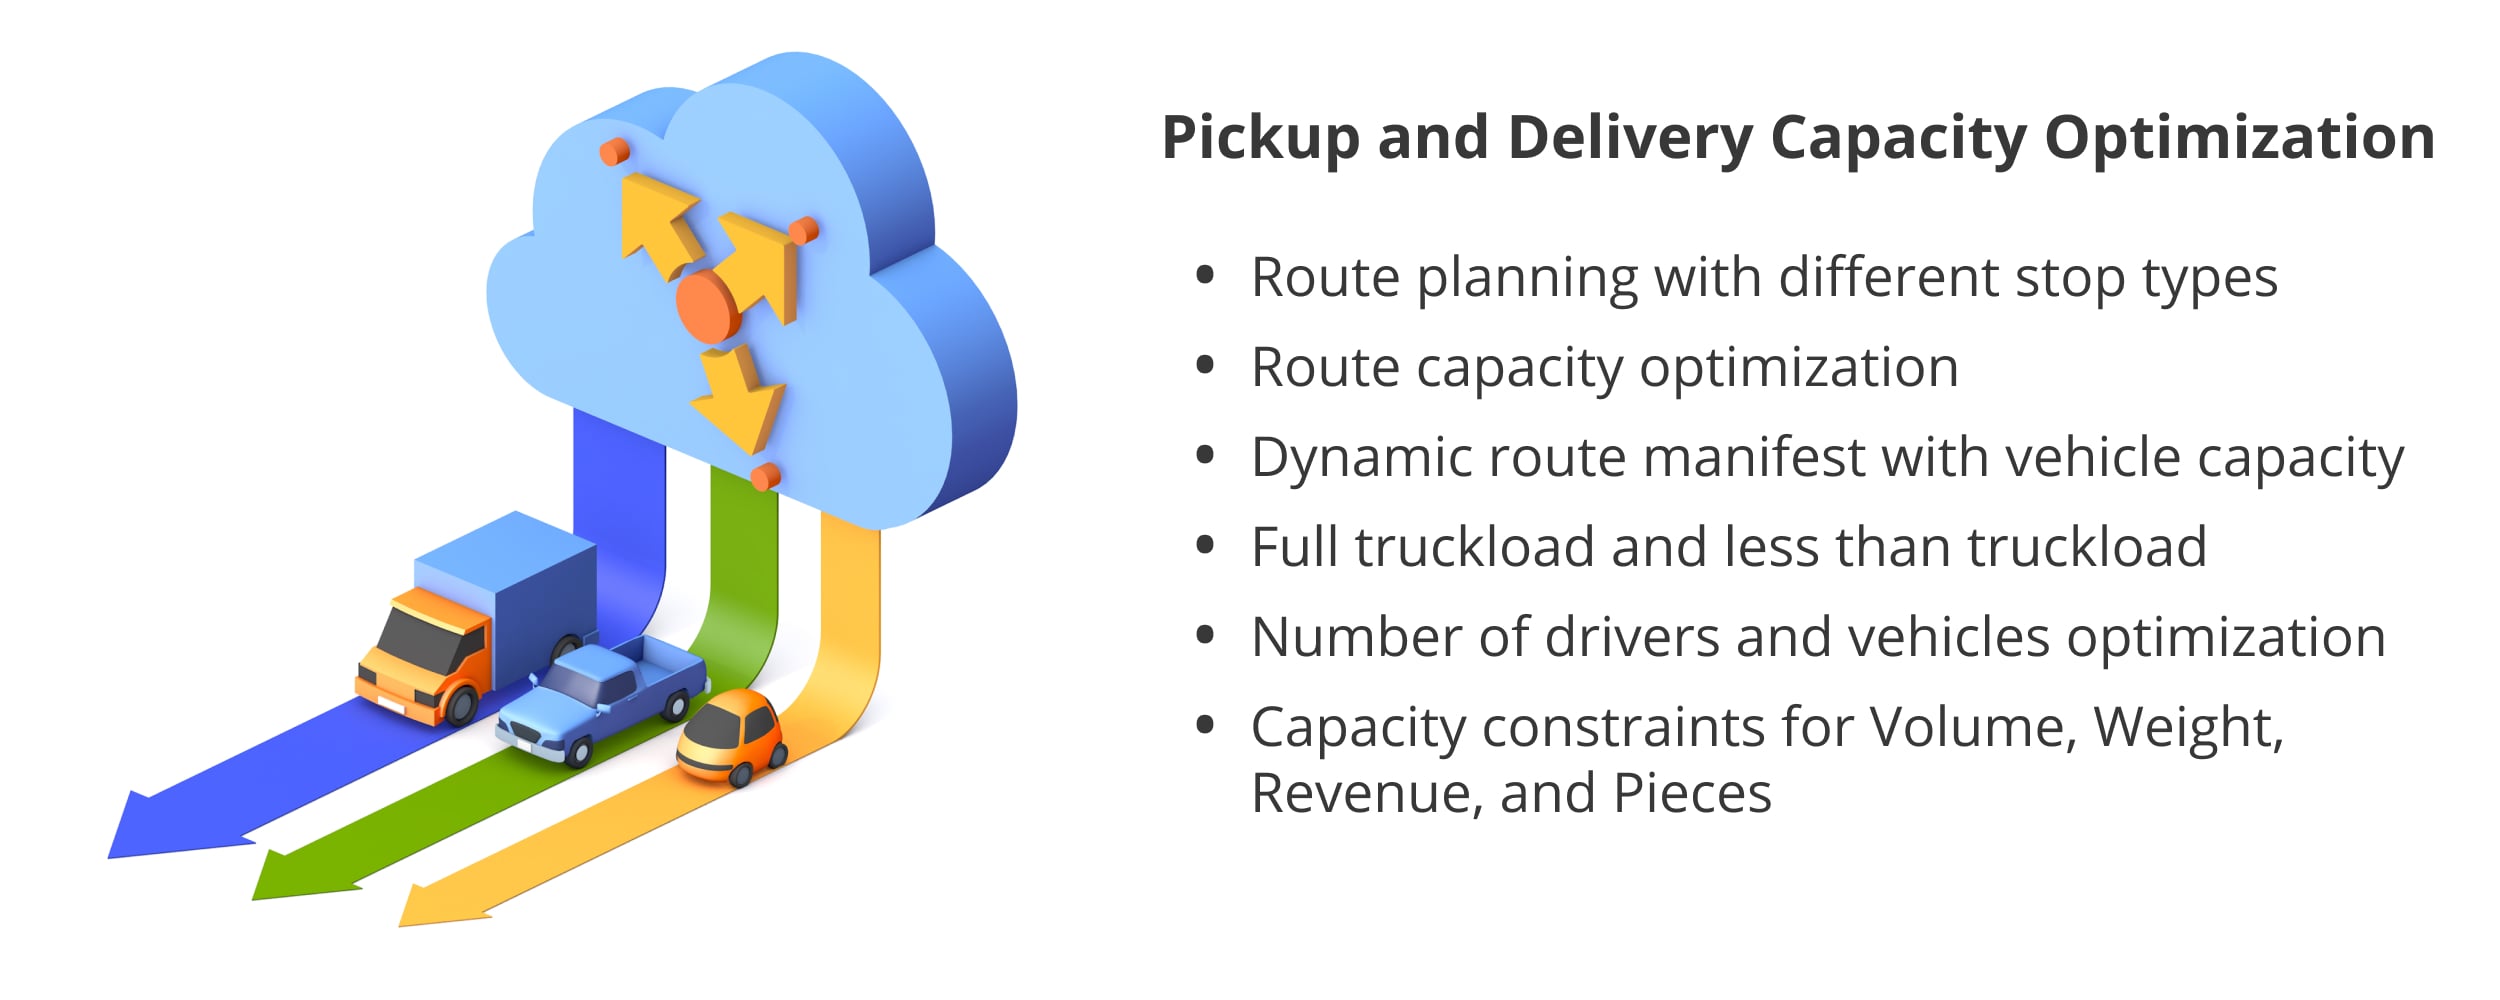 Pickup and delivery capacity optimization for full truckload and less than truckload routing.